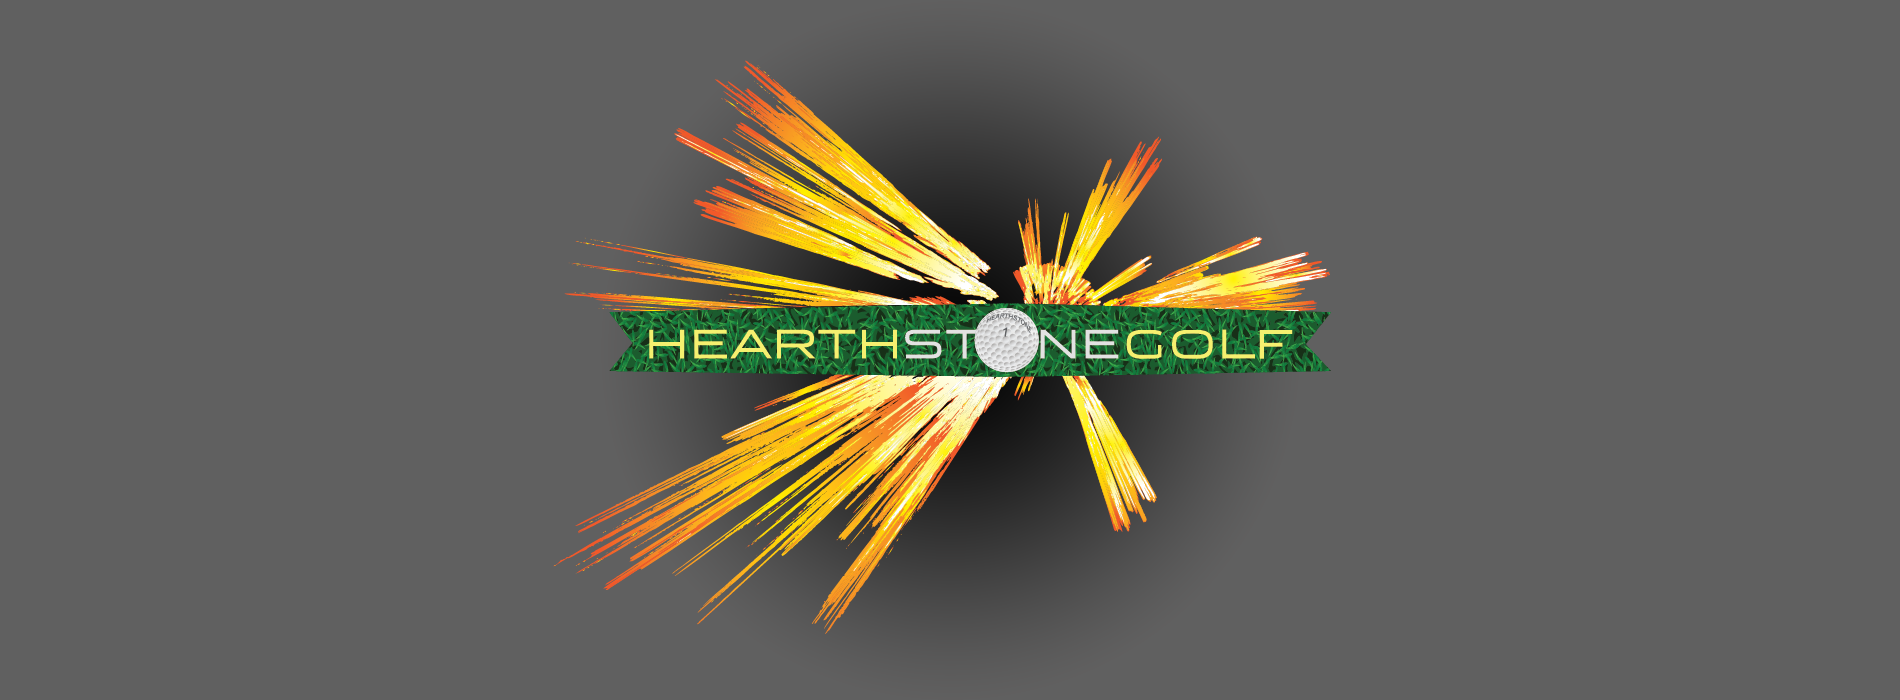 images/front_page/HearthStoneGOLF_gradient.png